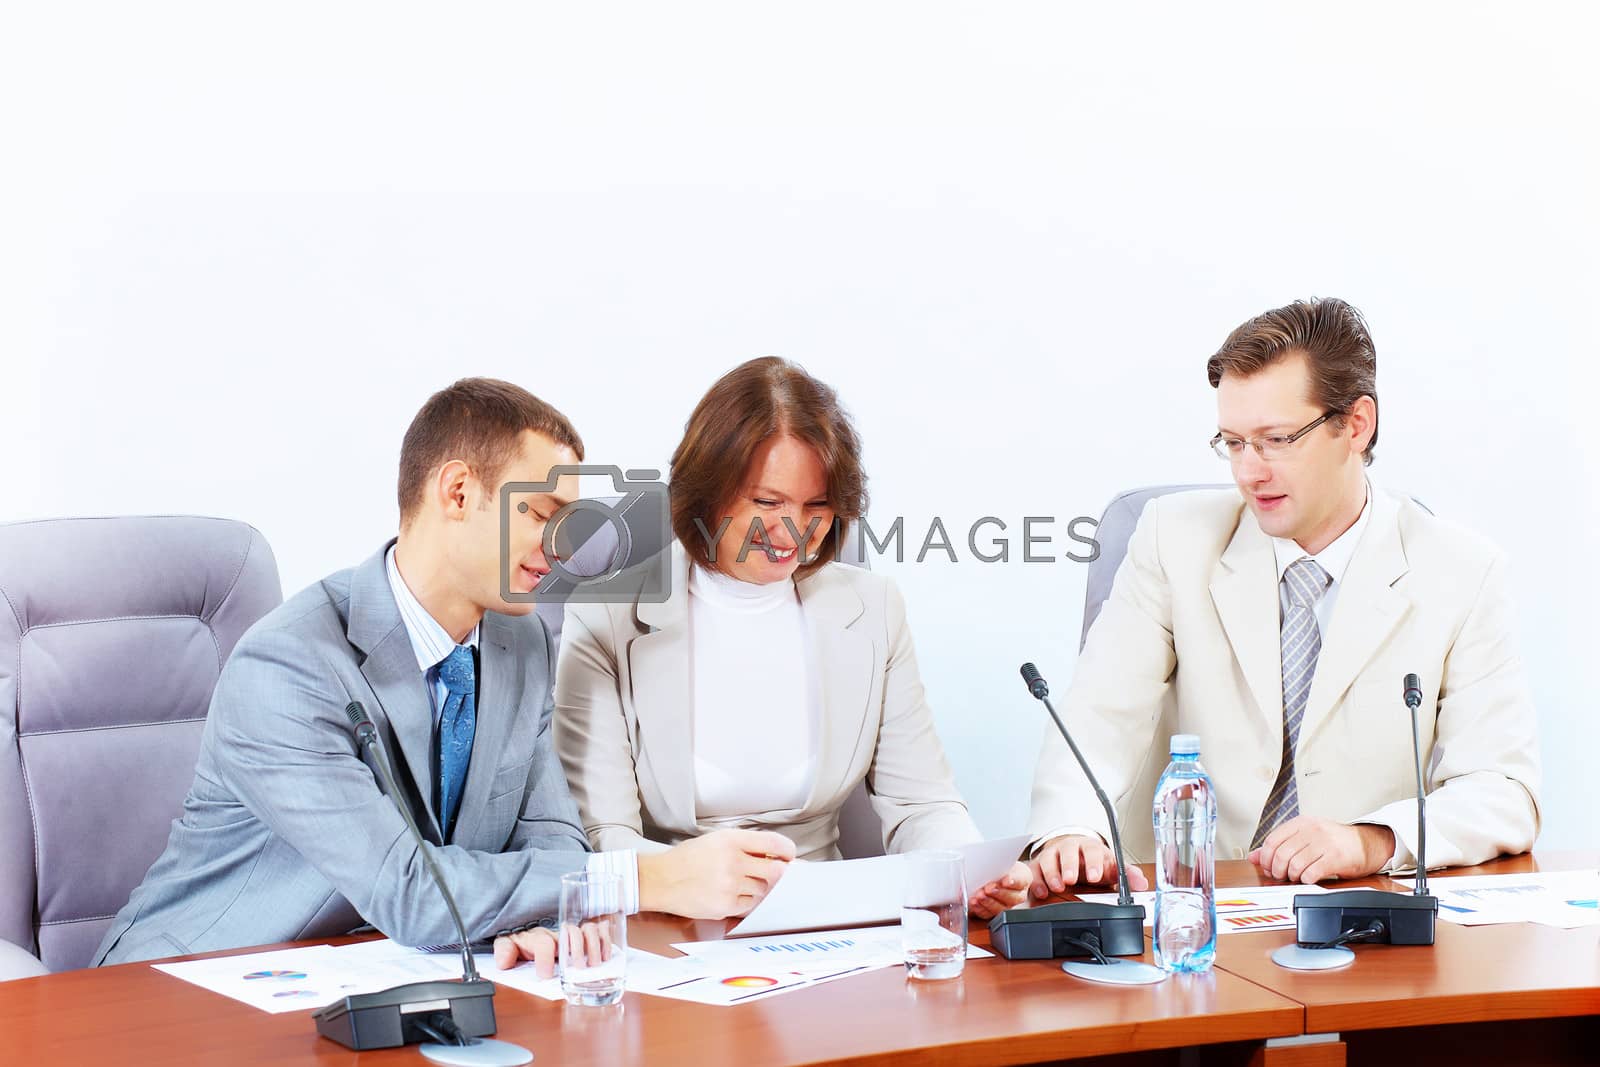 Royalty free image of Three businesspeople at meeting by sergey_nivens